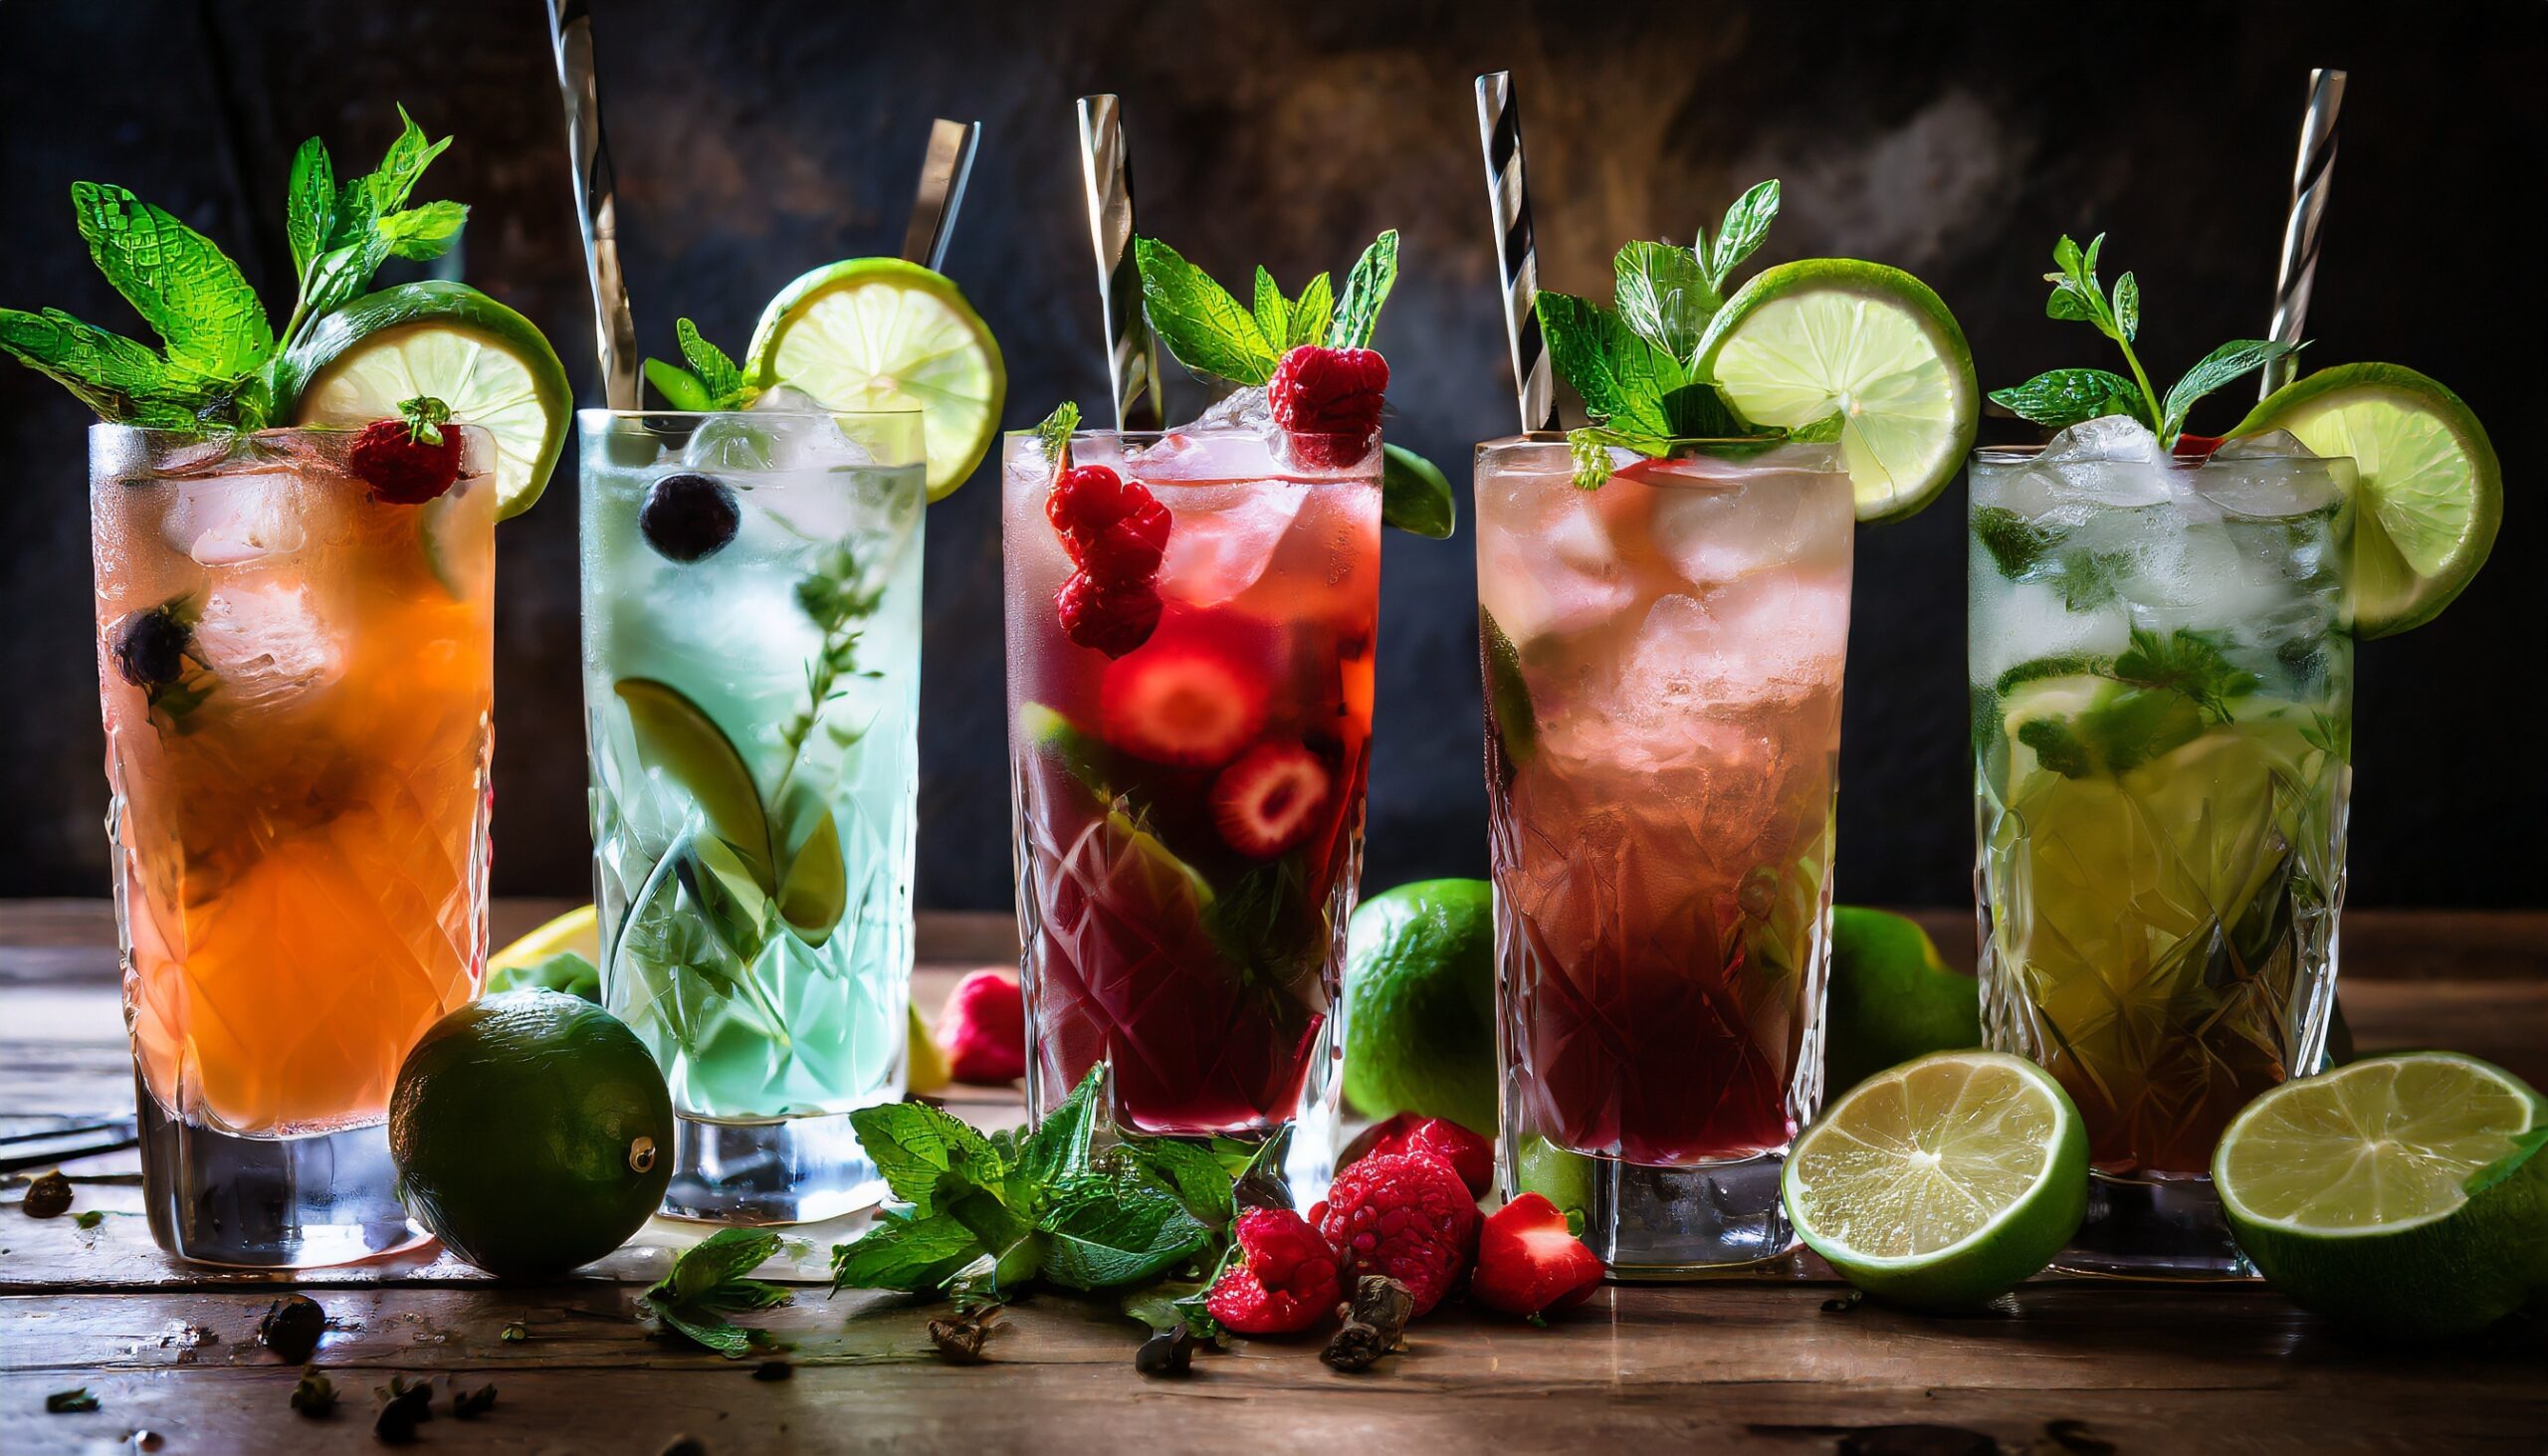 Mocktails drinks, Classic long glasses or mocktail highballs, with berries, lime, herbs and ice